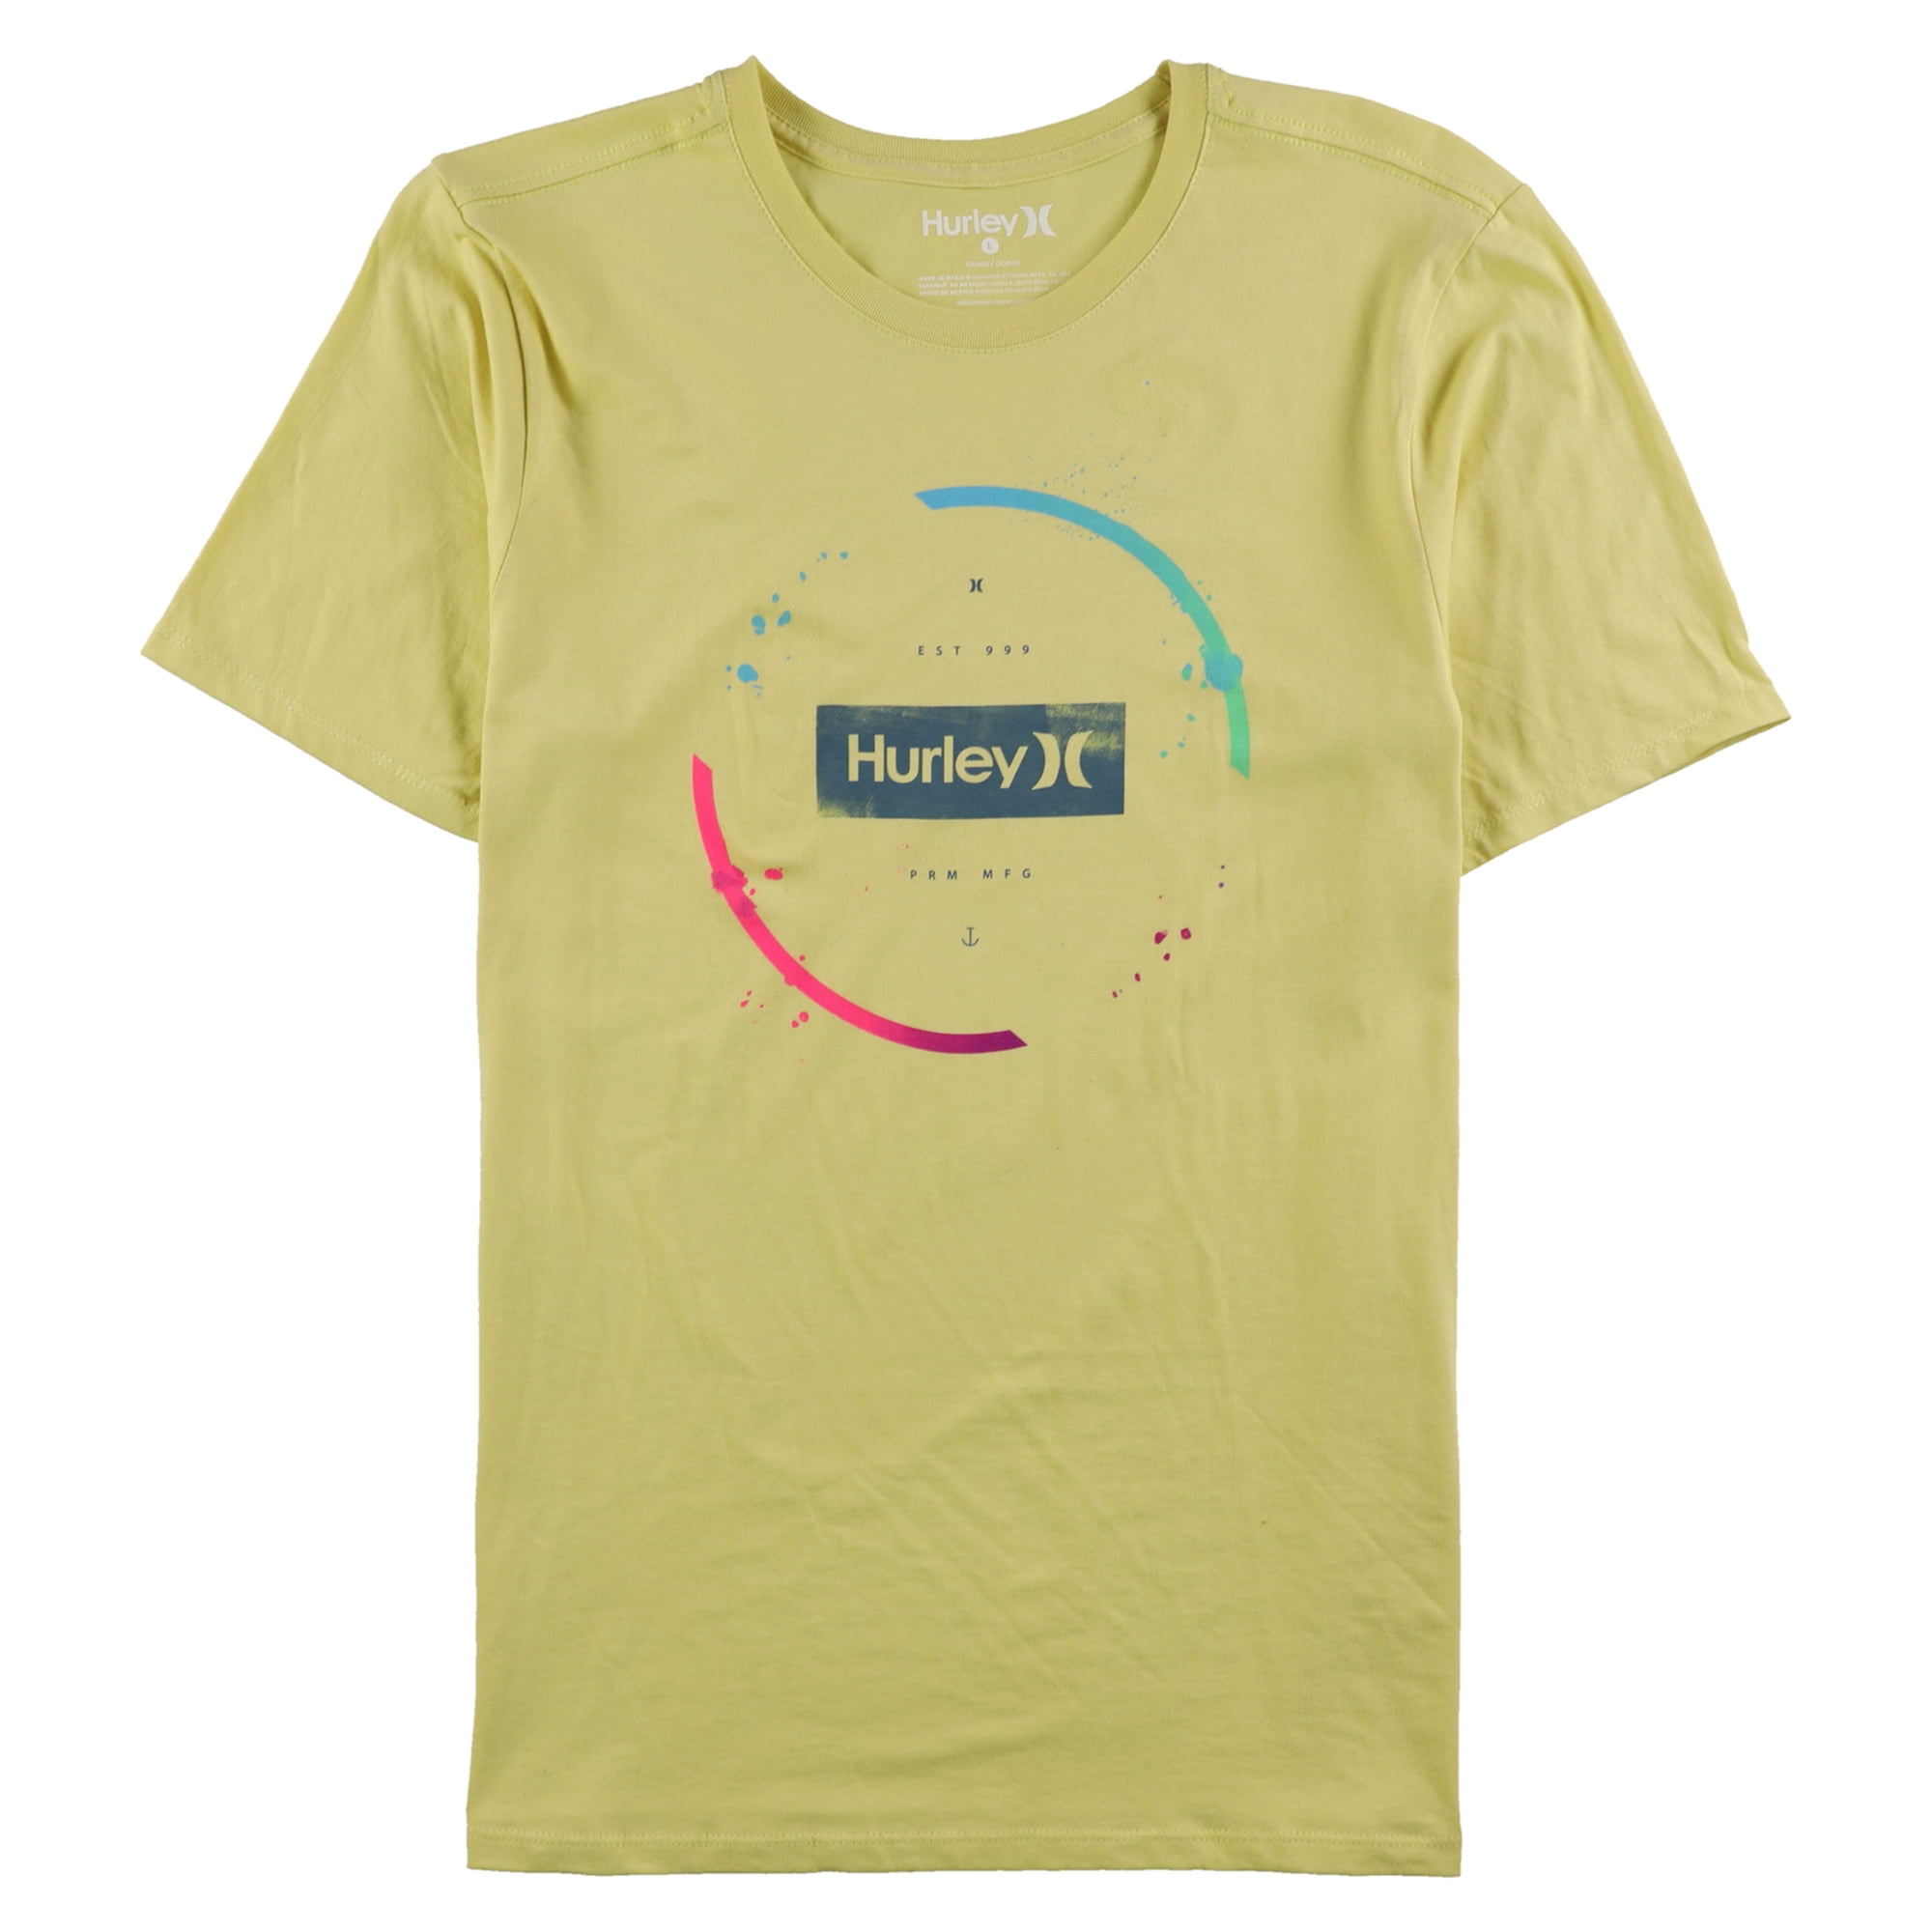 Hurley - Hurley Mens Ellipses Graphic T-Shirt, yellow, XX-Large ...